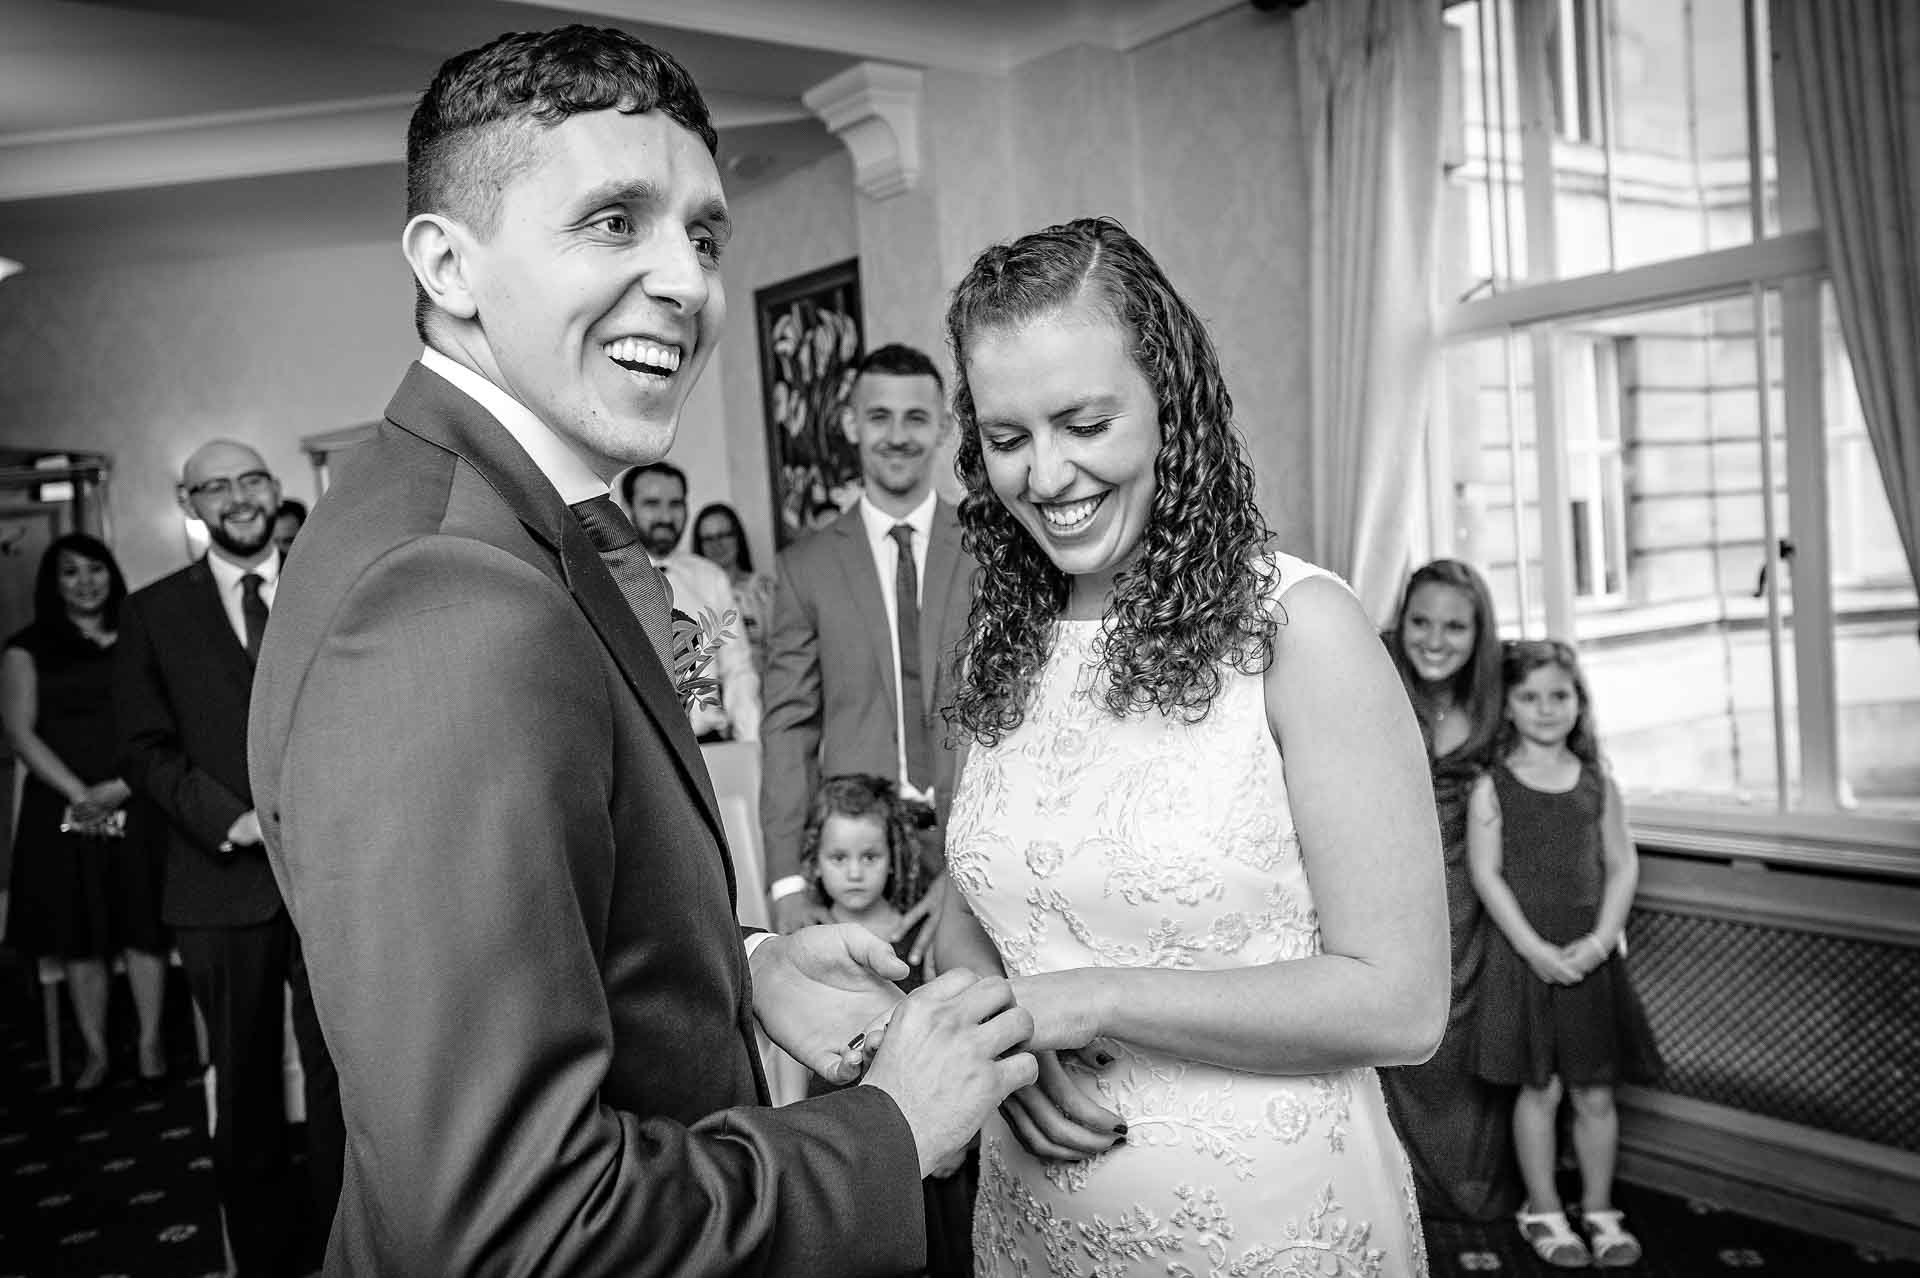 Groom Laughing as he Places Ring on Bride's Finger at Wandsworth Town Hall